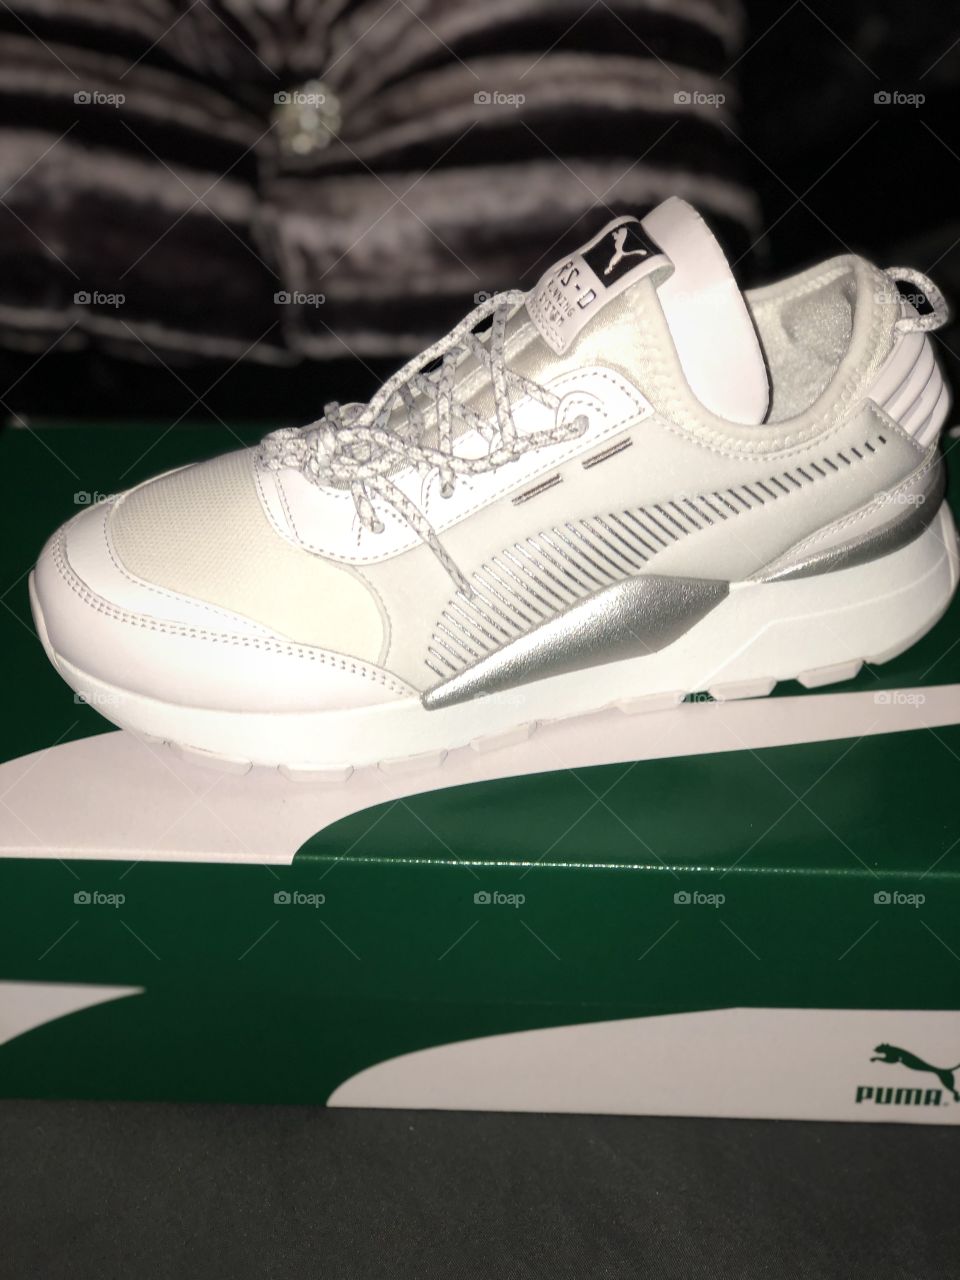 This is a puma trainer , white with silver outlines on it perfect fit nice and comfy ready for summer colour.